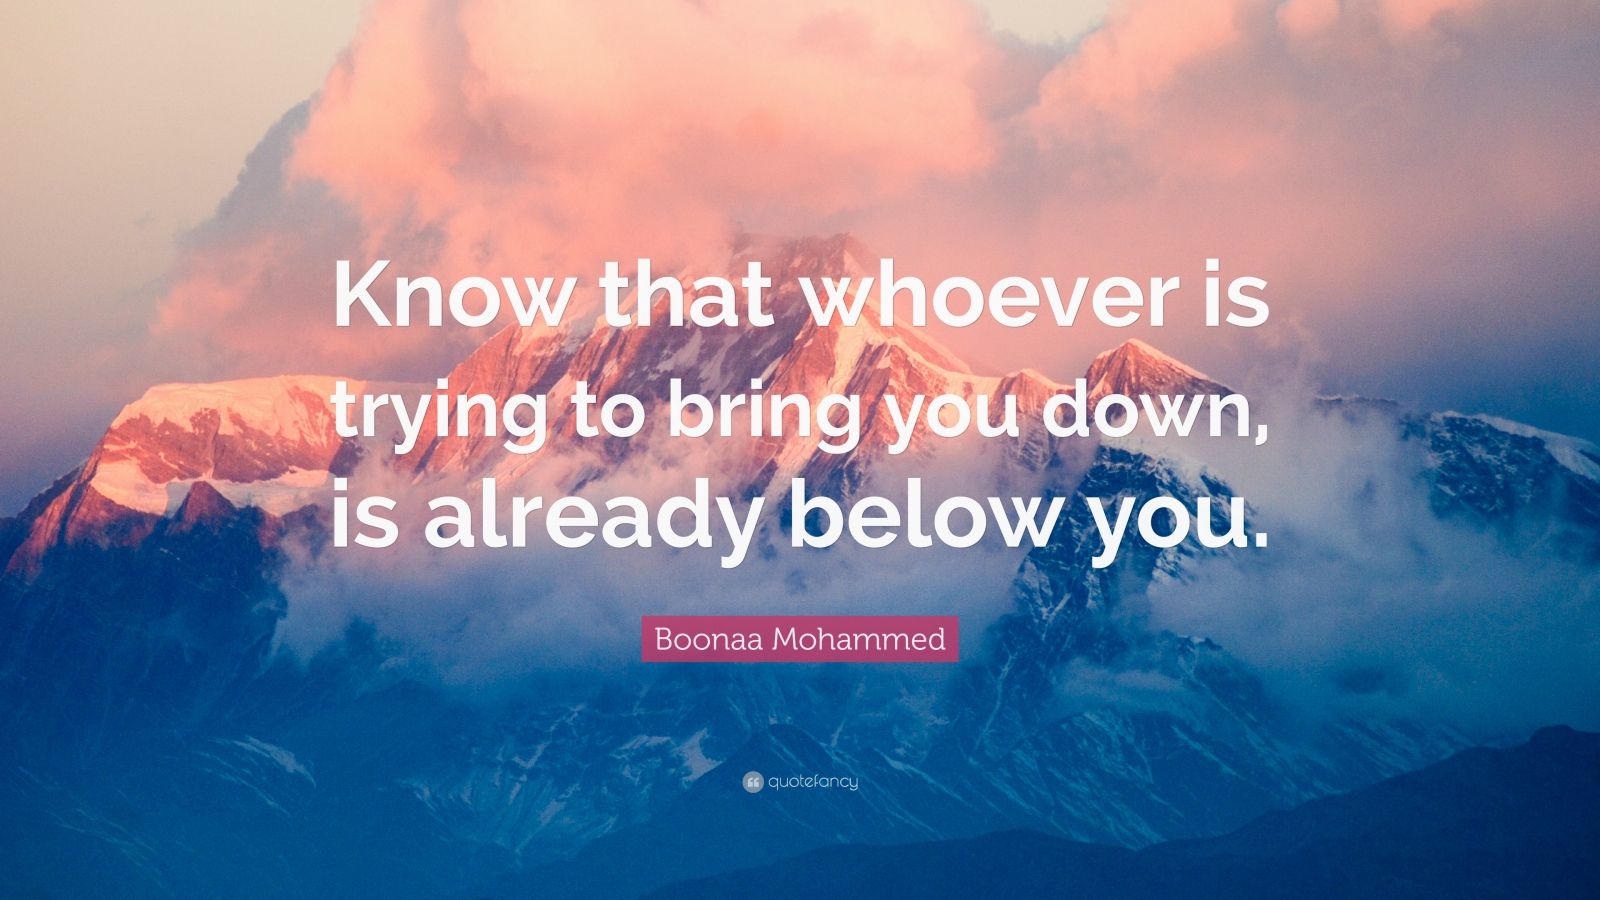 Boonaa Mohammed Quote “know That Whoever Is Trying To Bring You Down Is Already Below You” 9 